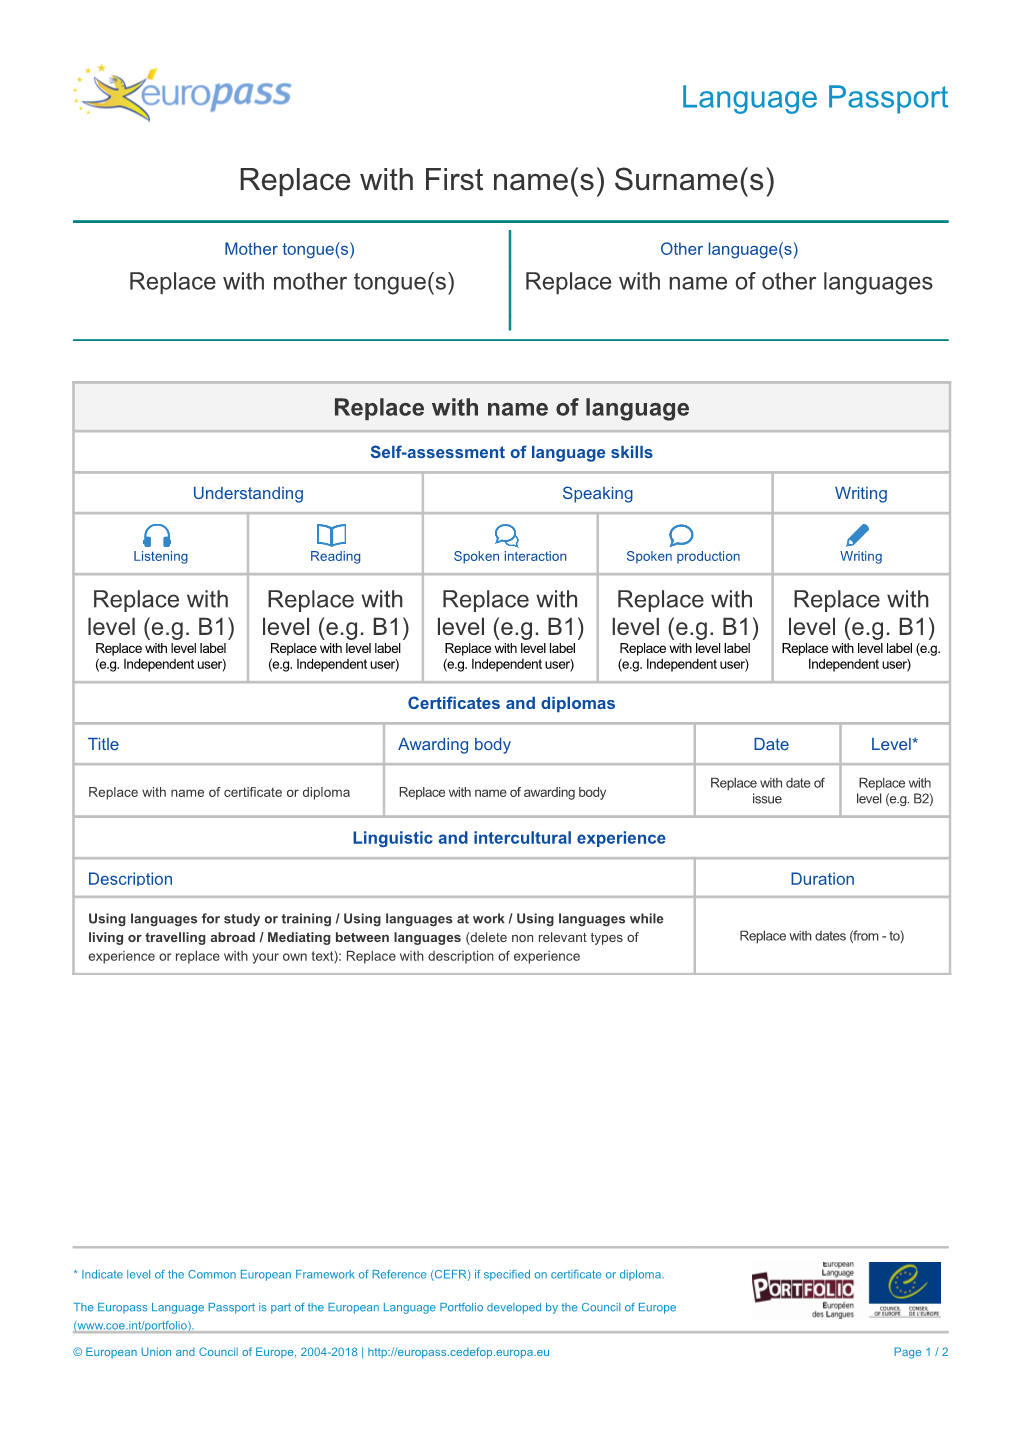 Common European Framework of Reference for Languages - Self-Assessment Grid s1